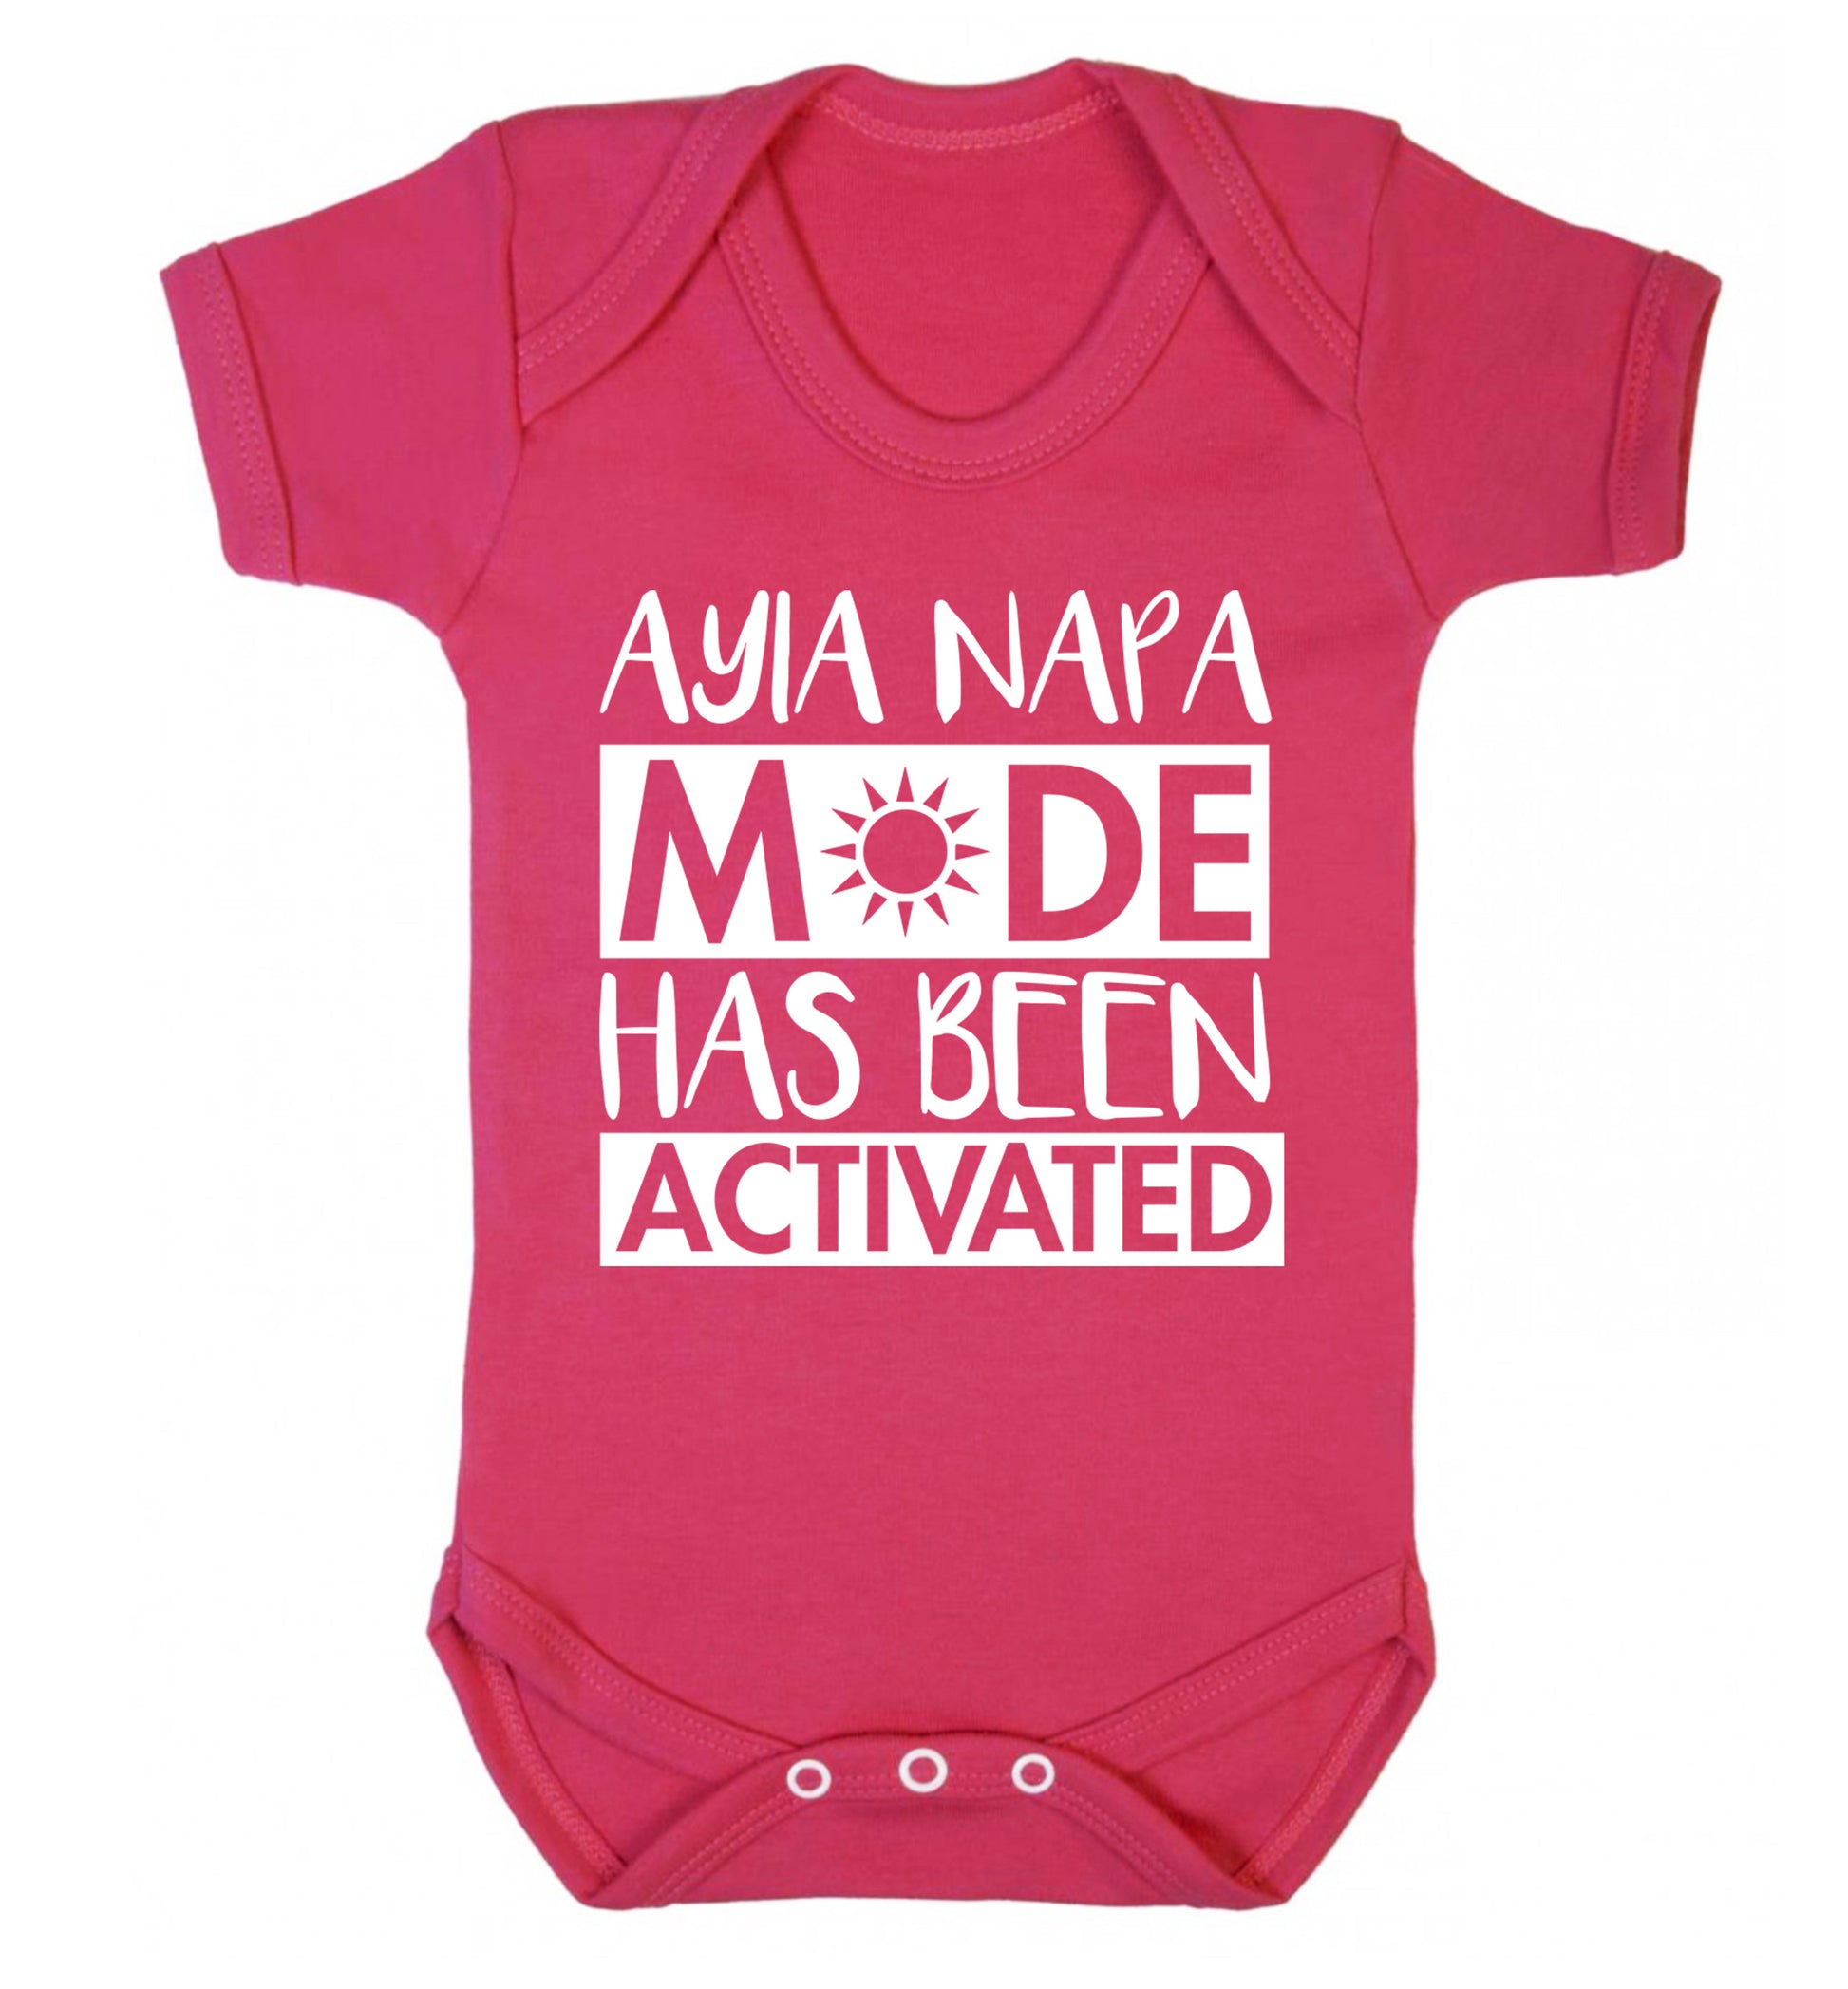 Aiya Napa mode has been activated Baby Vest dark pink 18-24 months